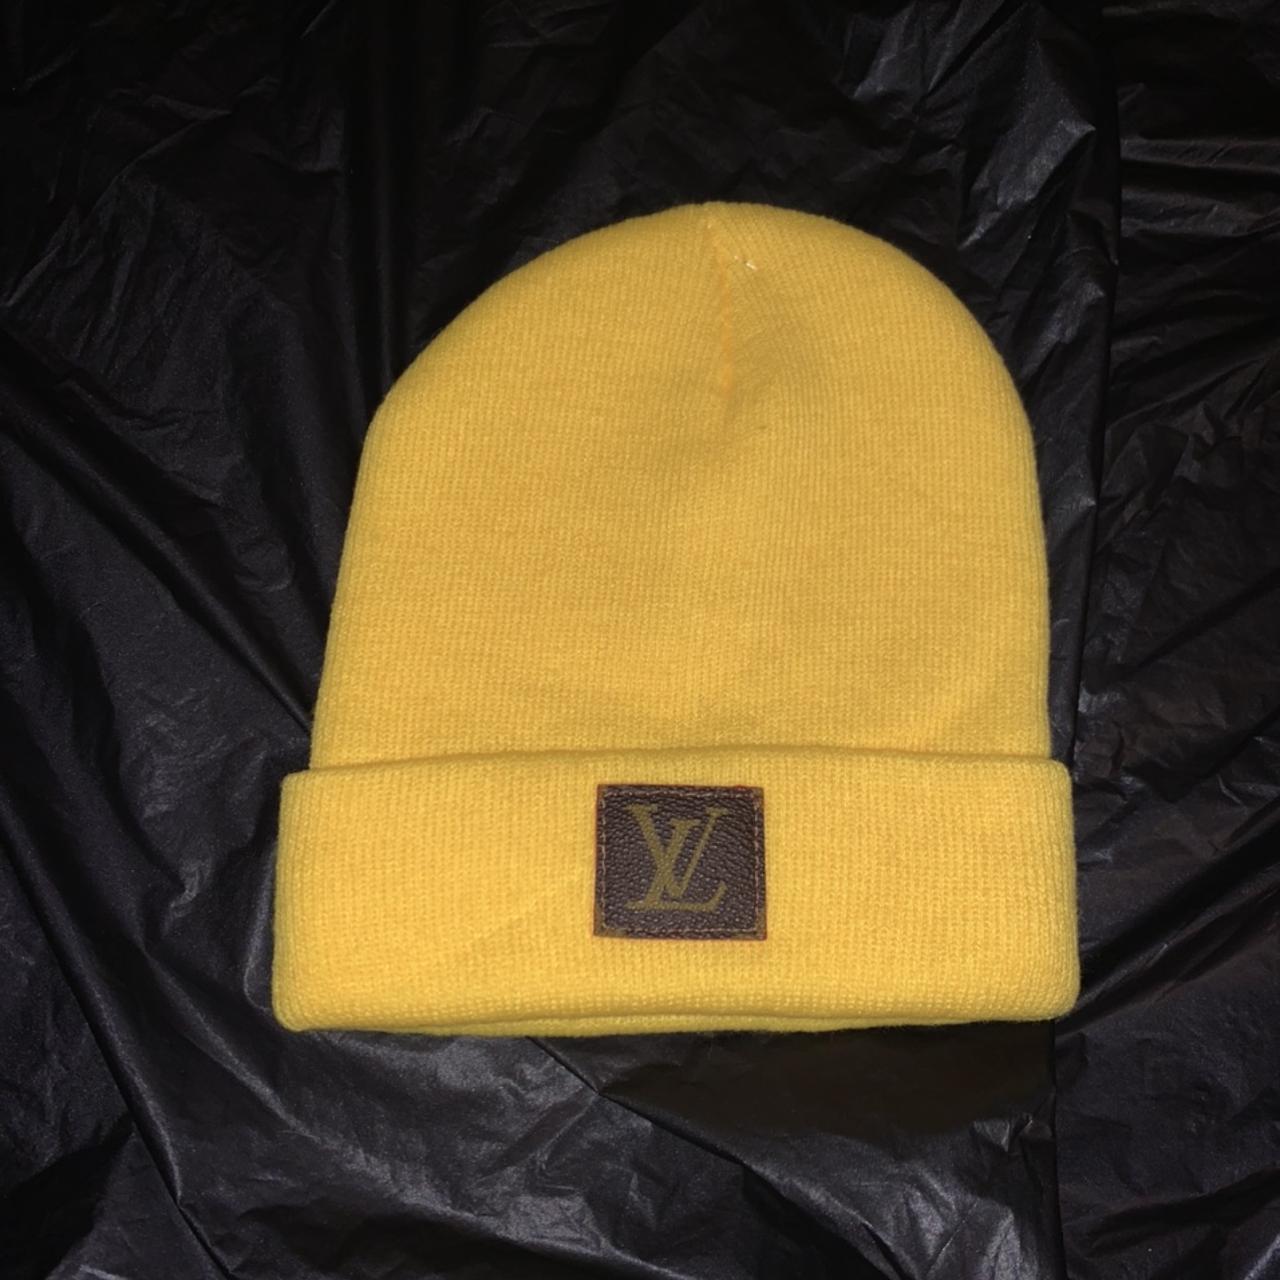 Louis Vuitton Beanies are 100% authentic and cut - Depop